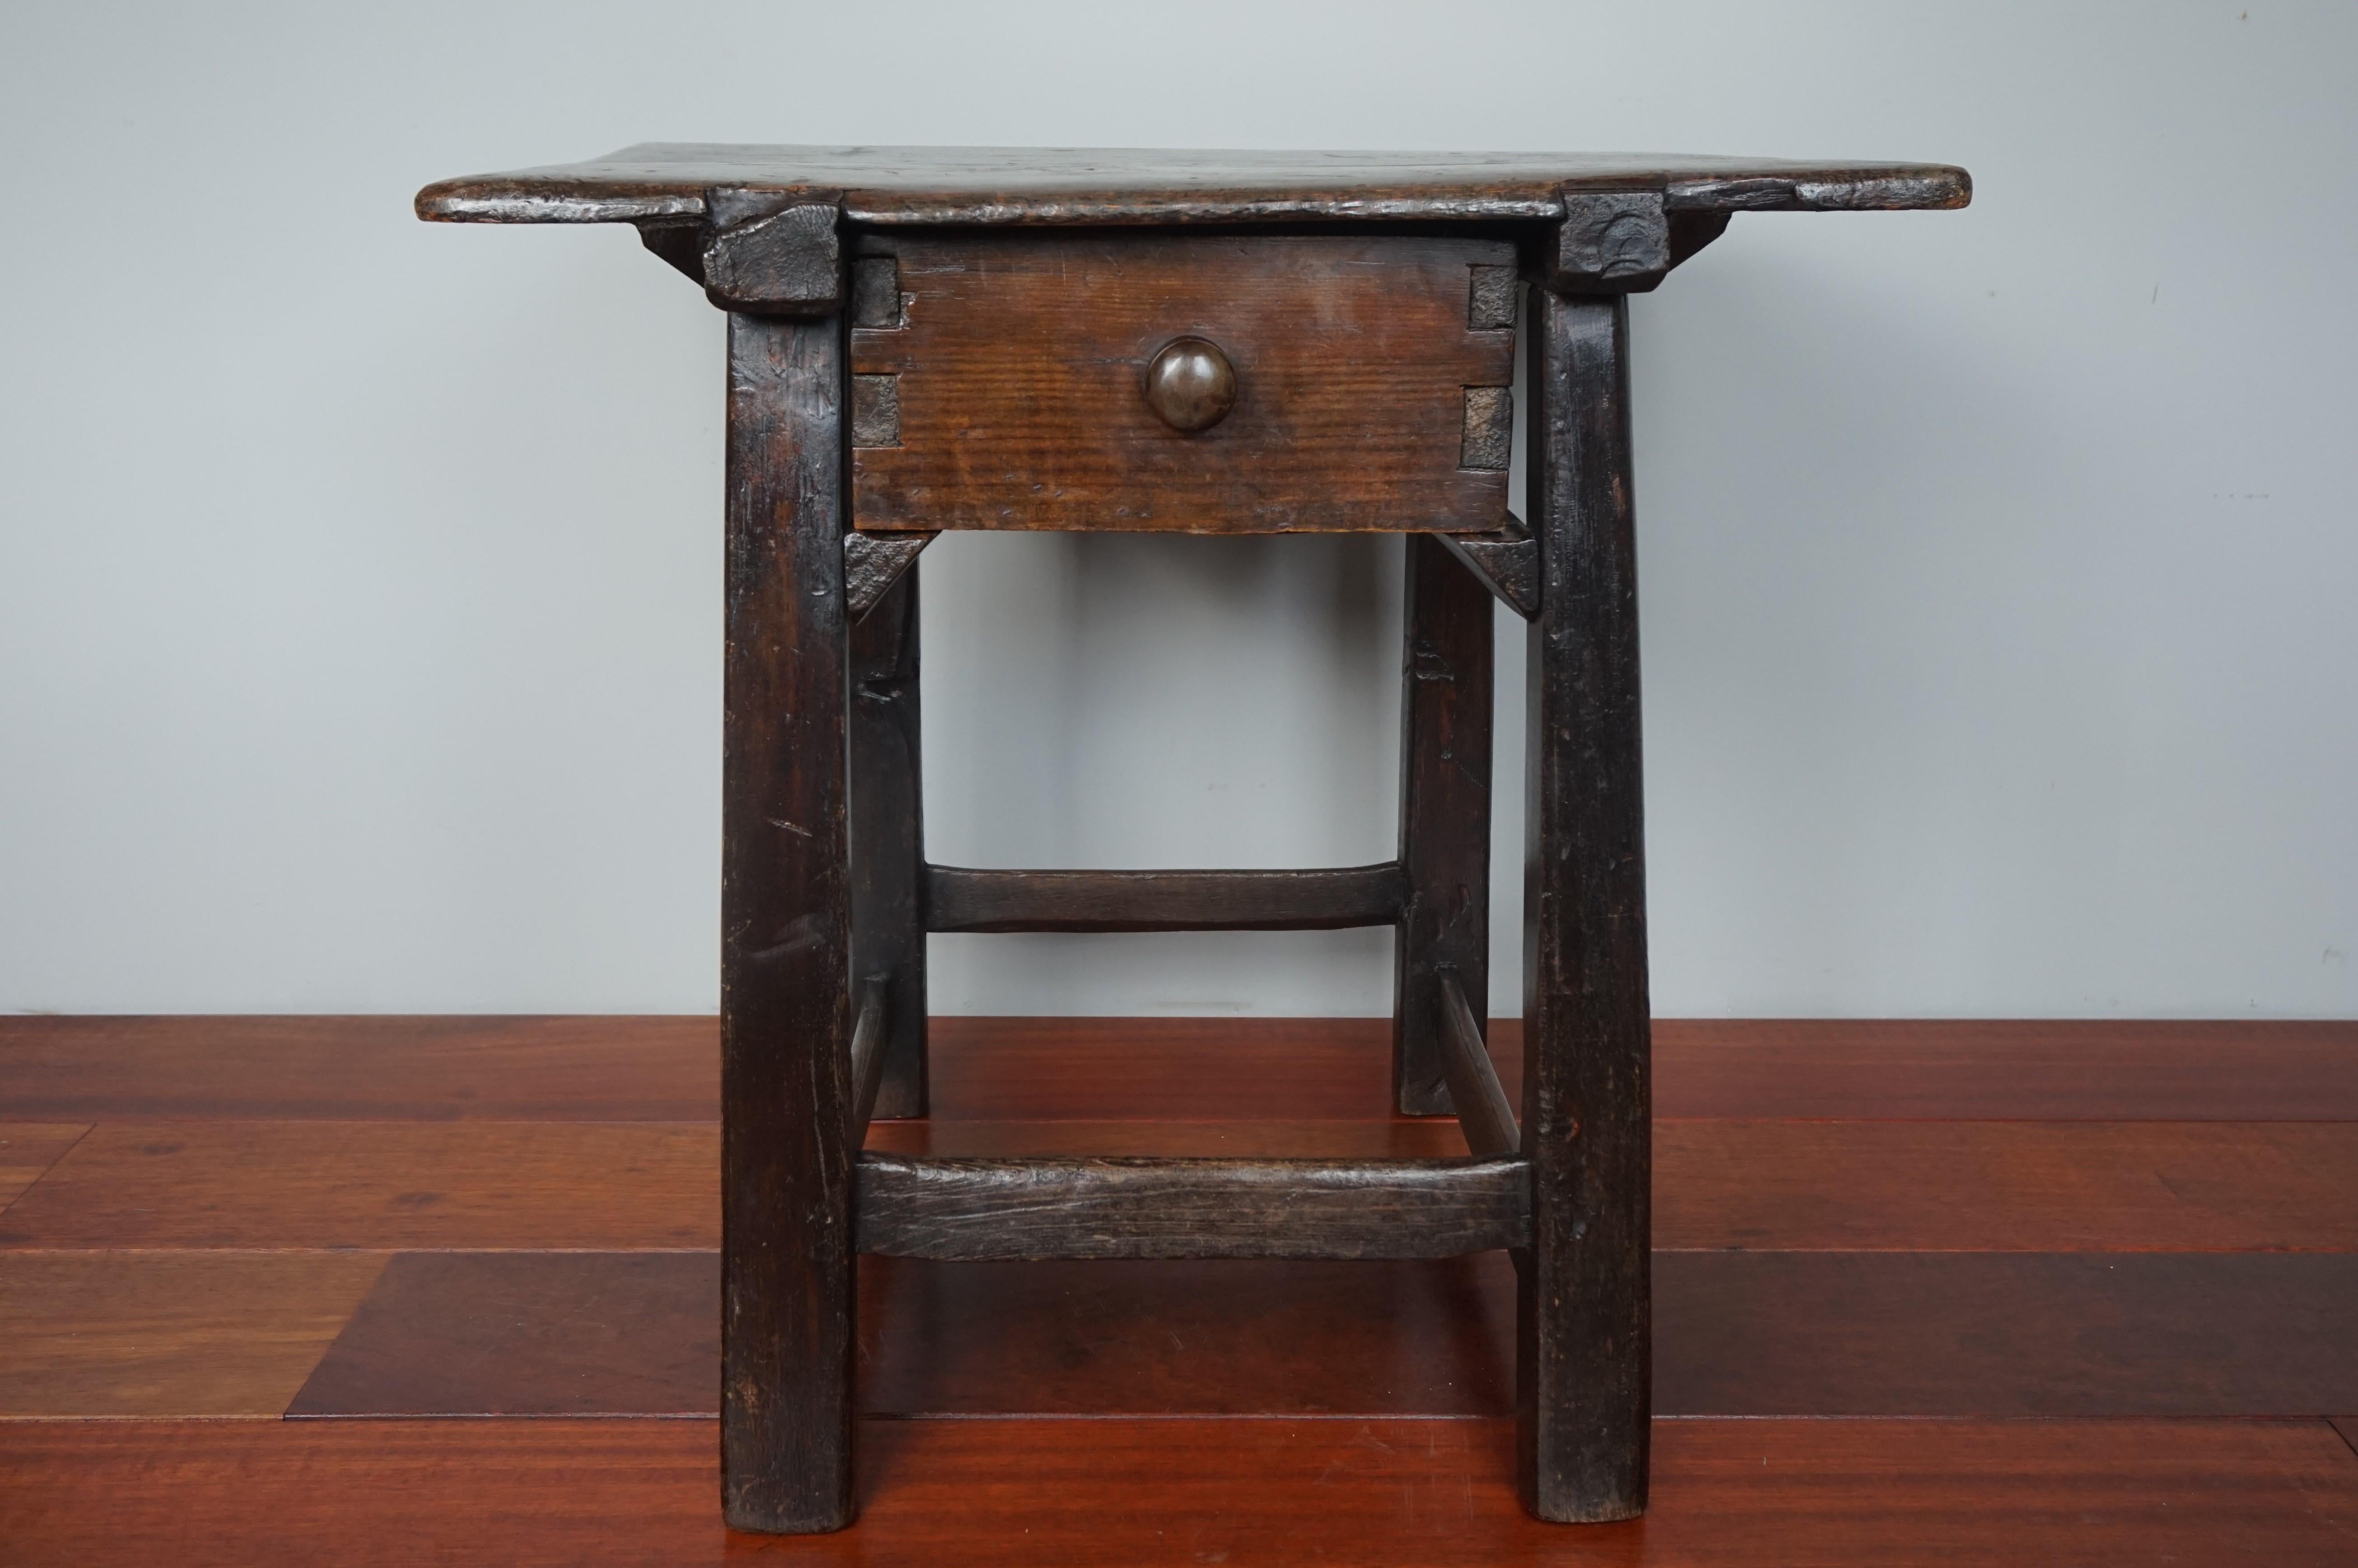 Beautifully time worn, early 18th century end or side table.

This relatively small size antique table is a joy to look at and the history of this kind of table makes it very interesting as well. Pay tables or paying tables were initially used by